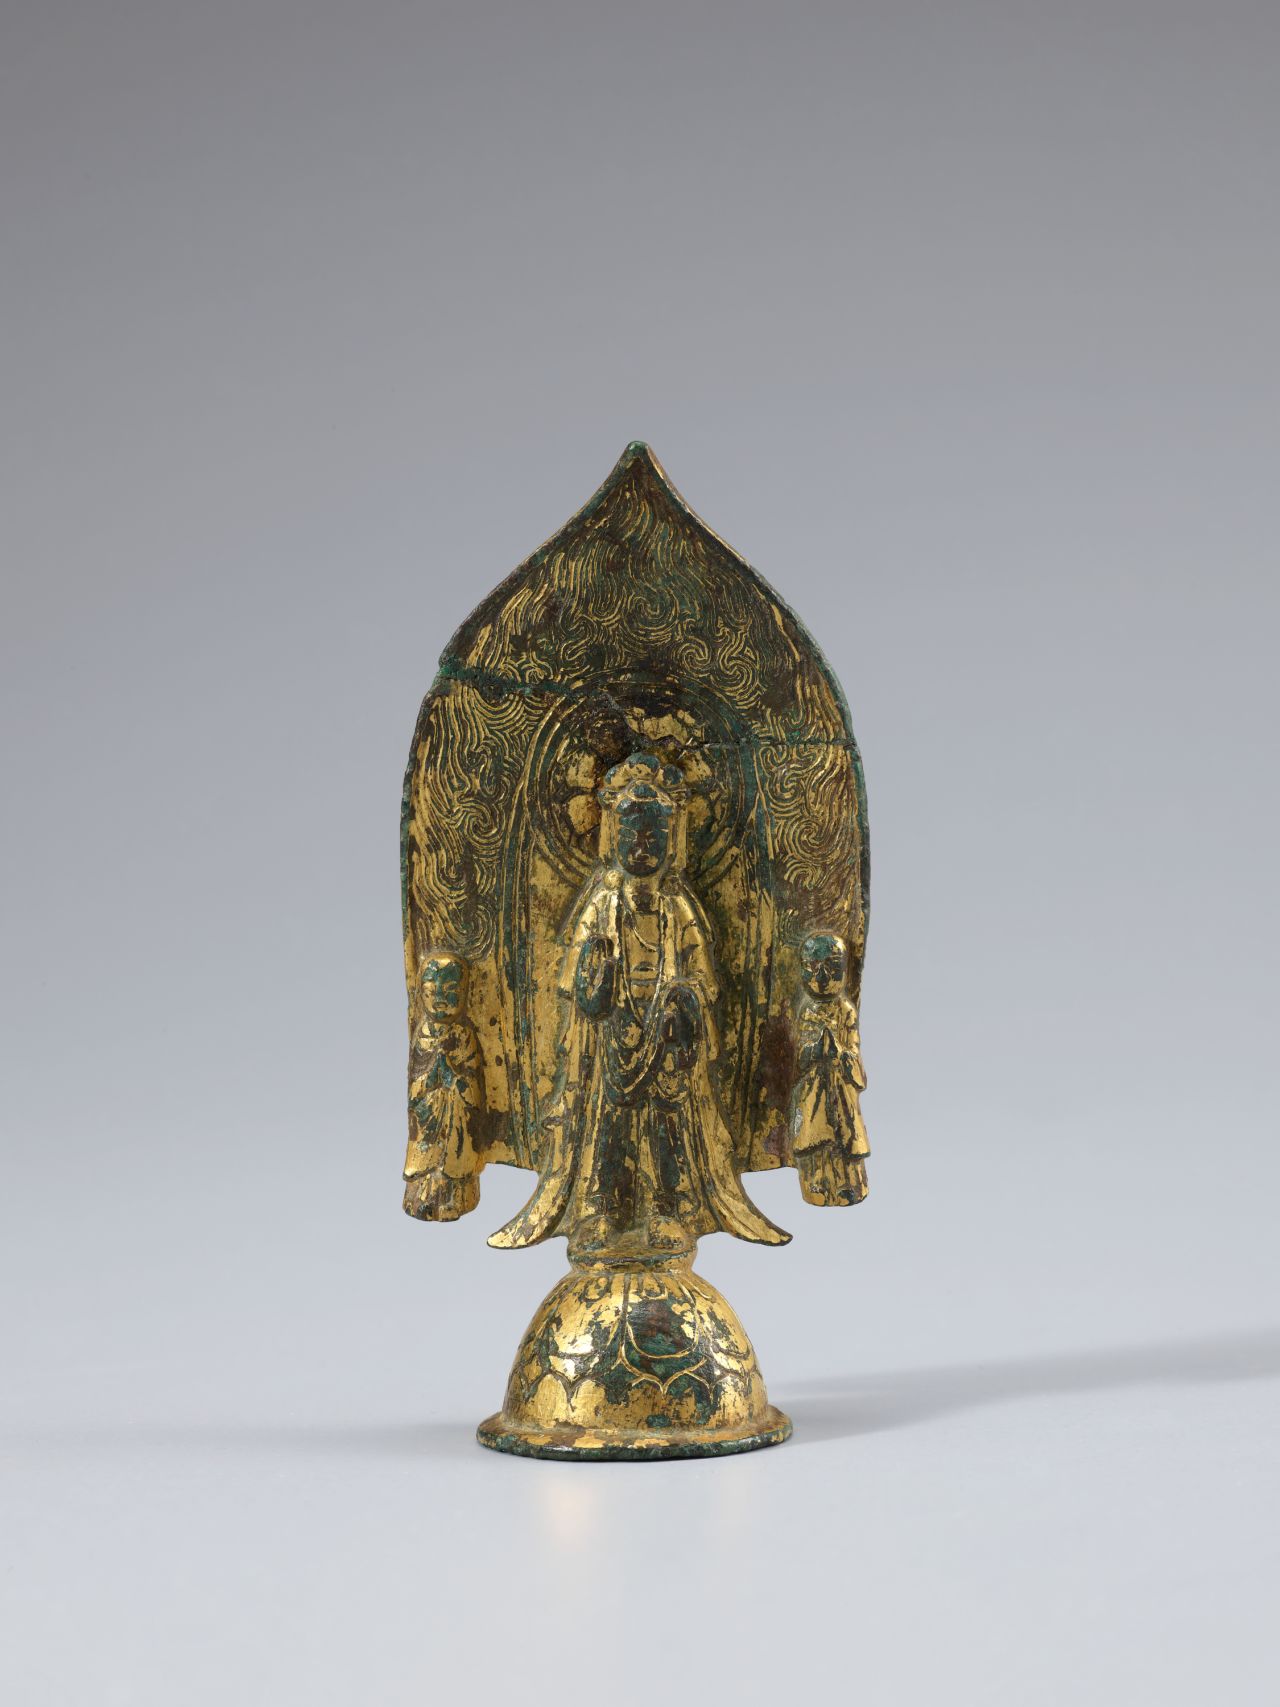 A bodhisattva, cast in bronze in the 6th century, was among the items deemed a "National Treasure" by South Korea's government. 